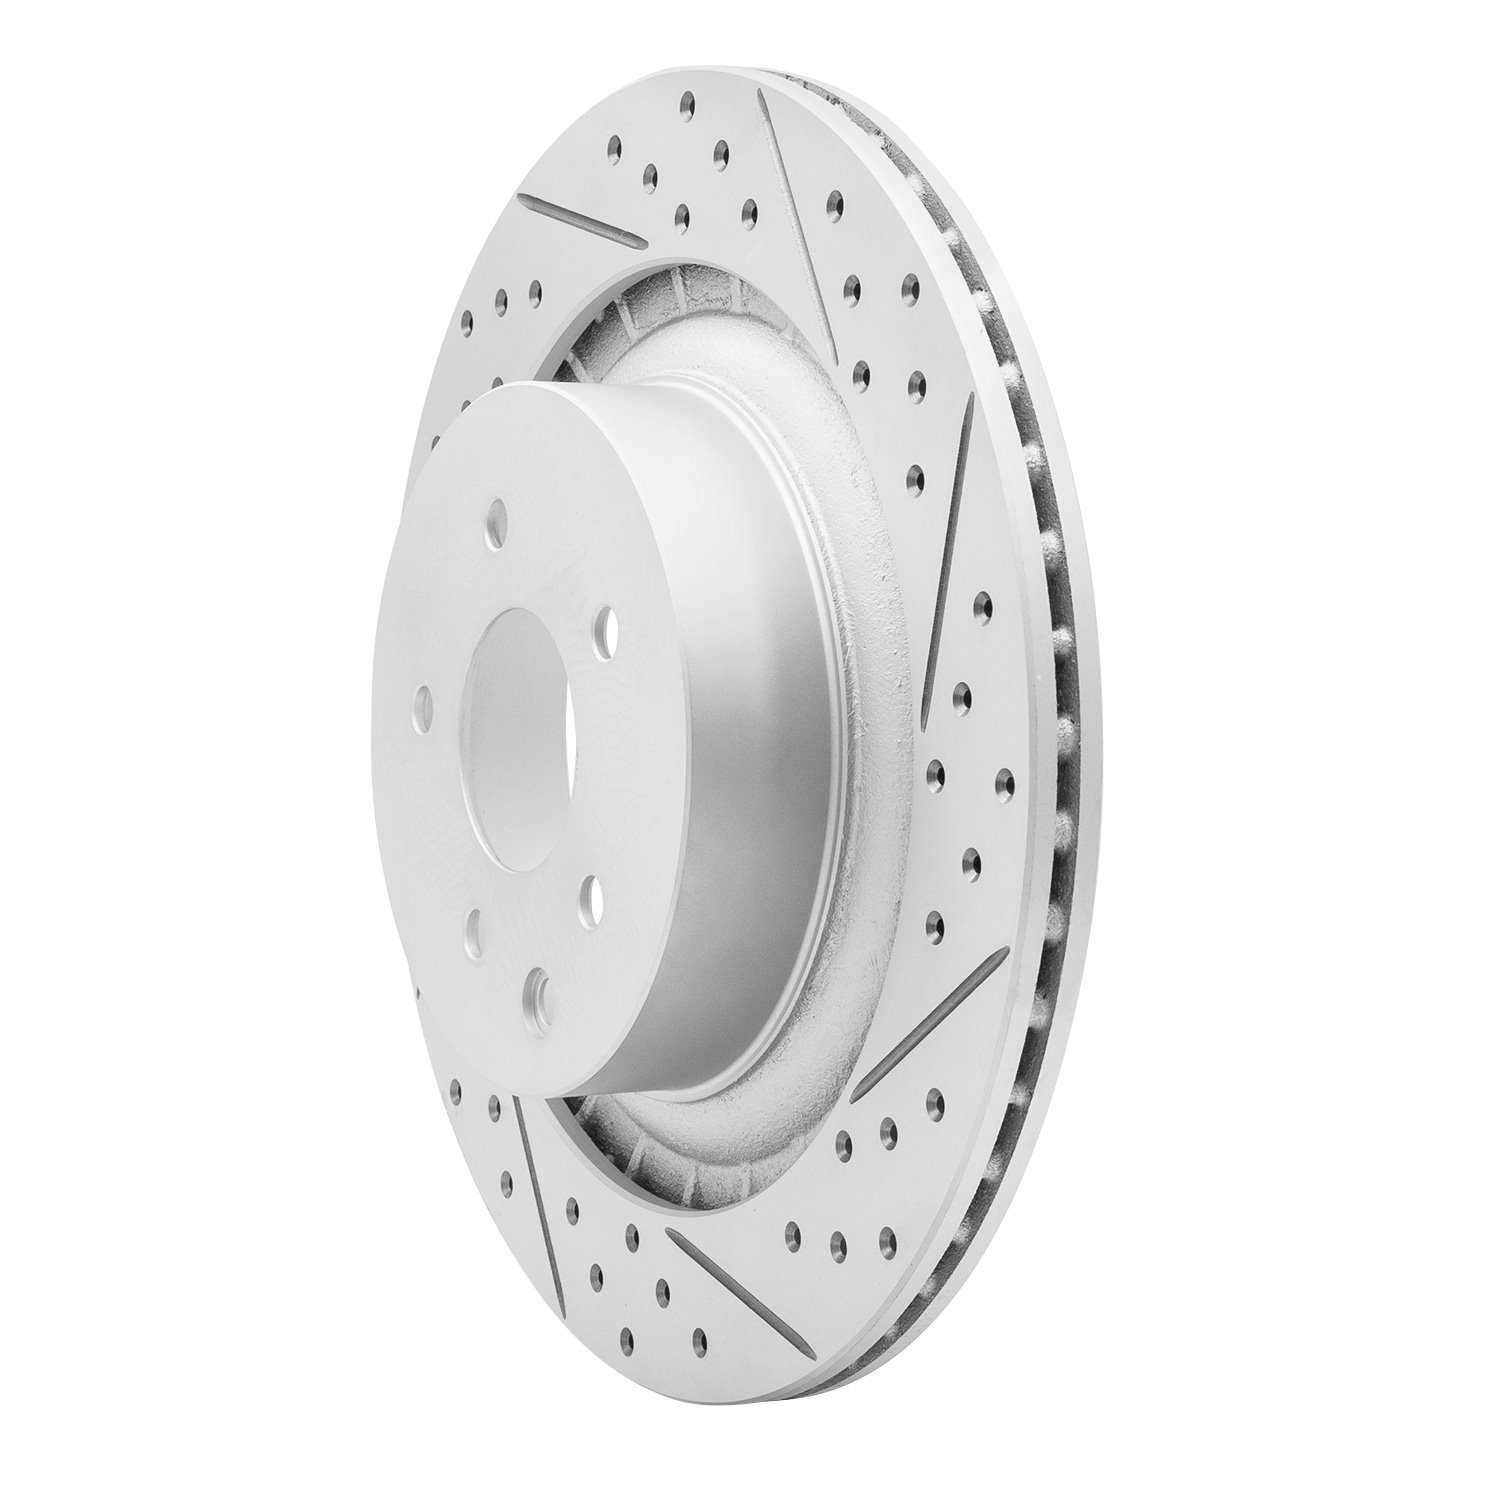 830-68013R Geoperformance Drilled/Slotted Brake Rotor, Fits Select Infiniti/Nissan, Position: Rear Right